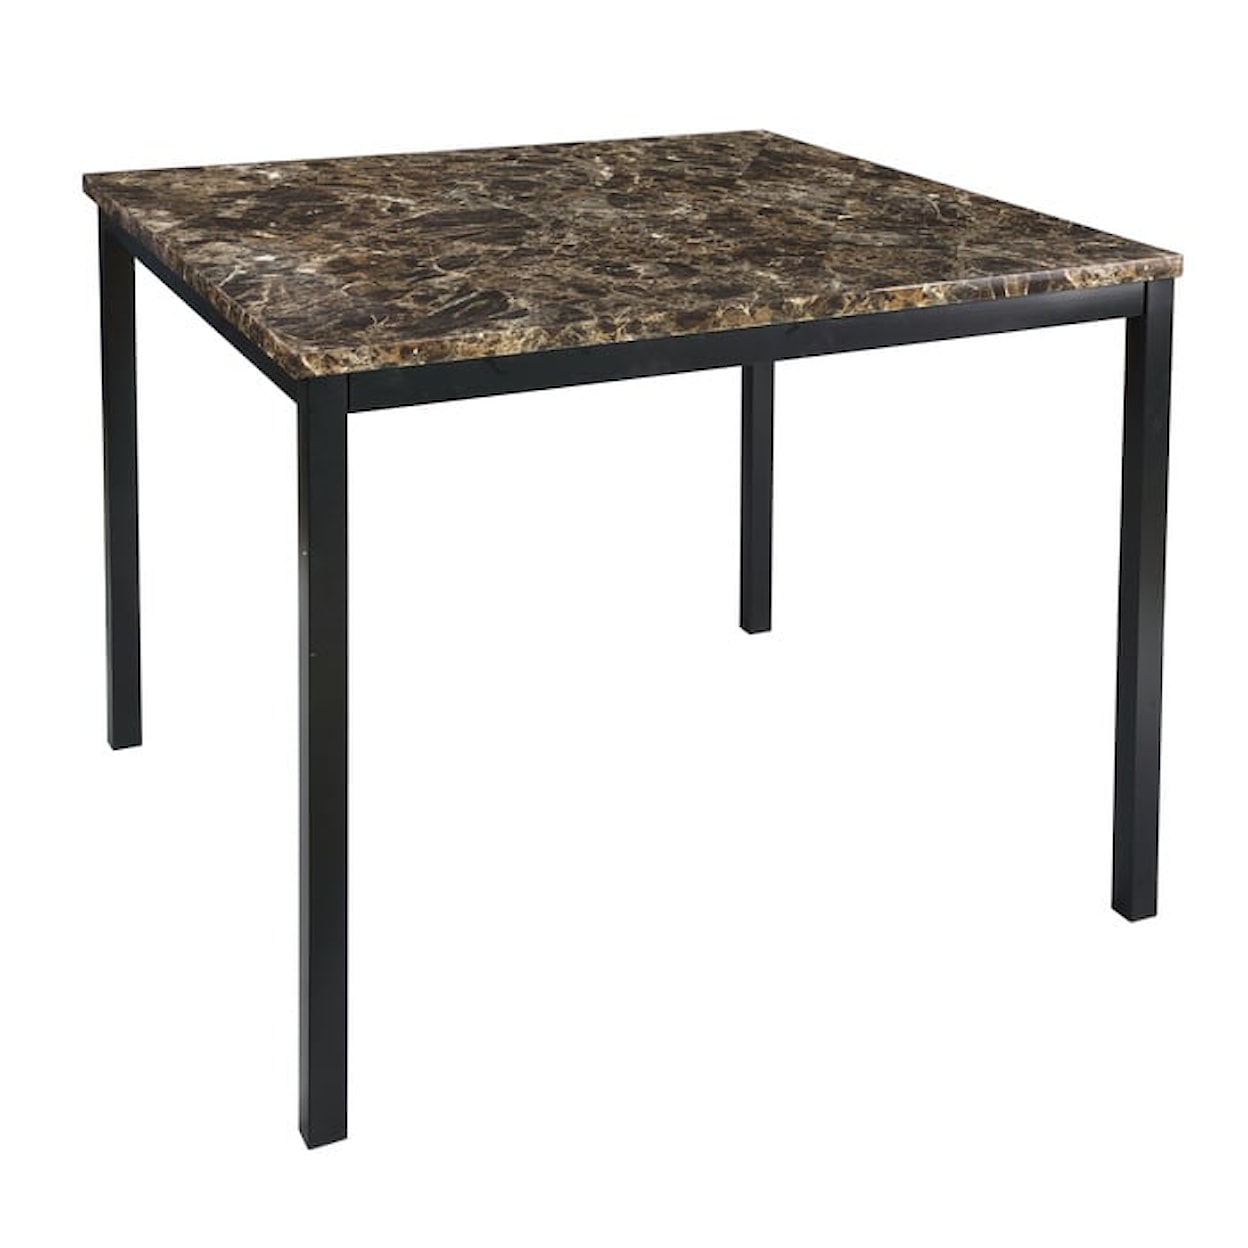 Homelegance Tempe Counter Height Table with Faux Marble Top